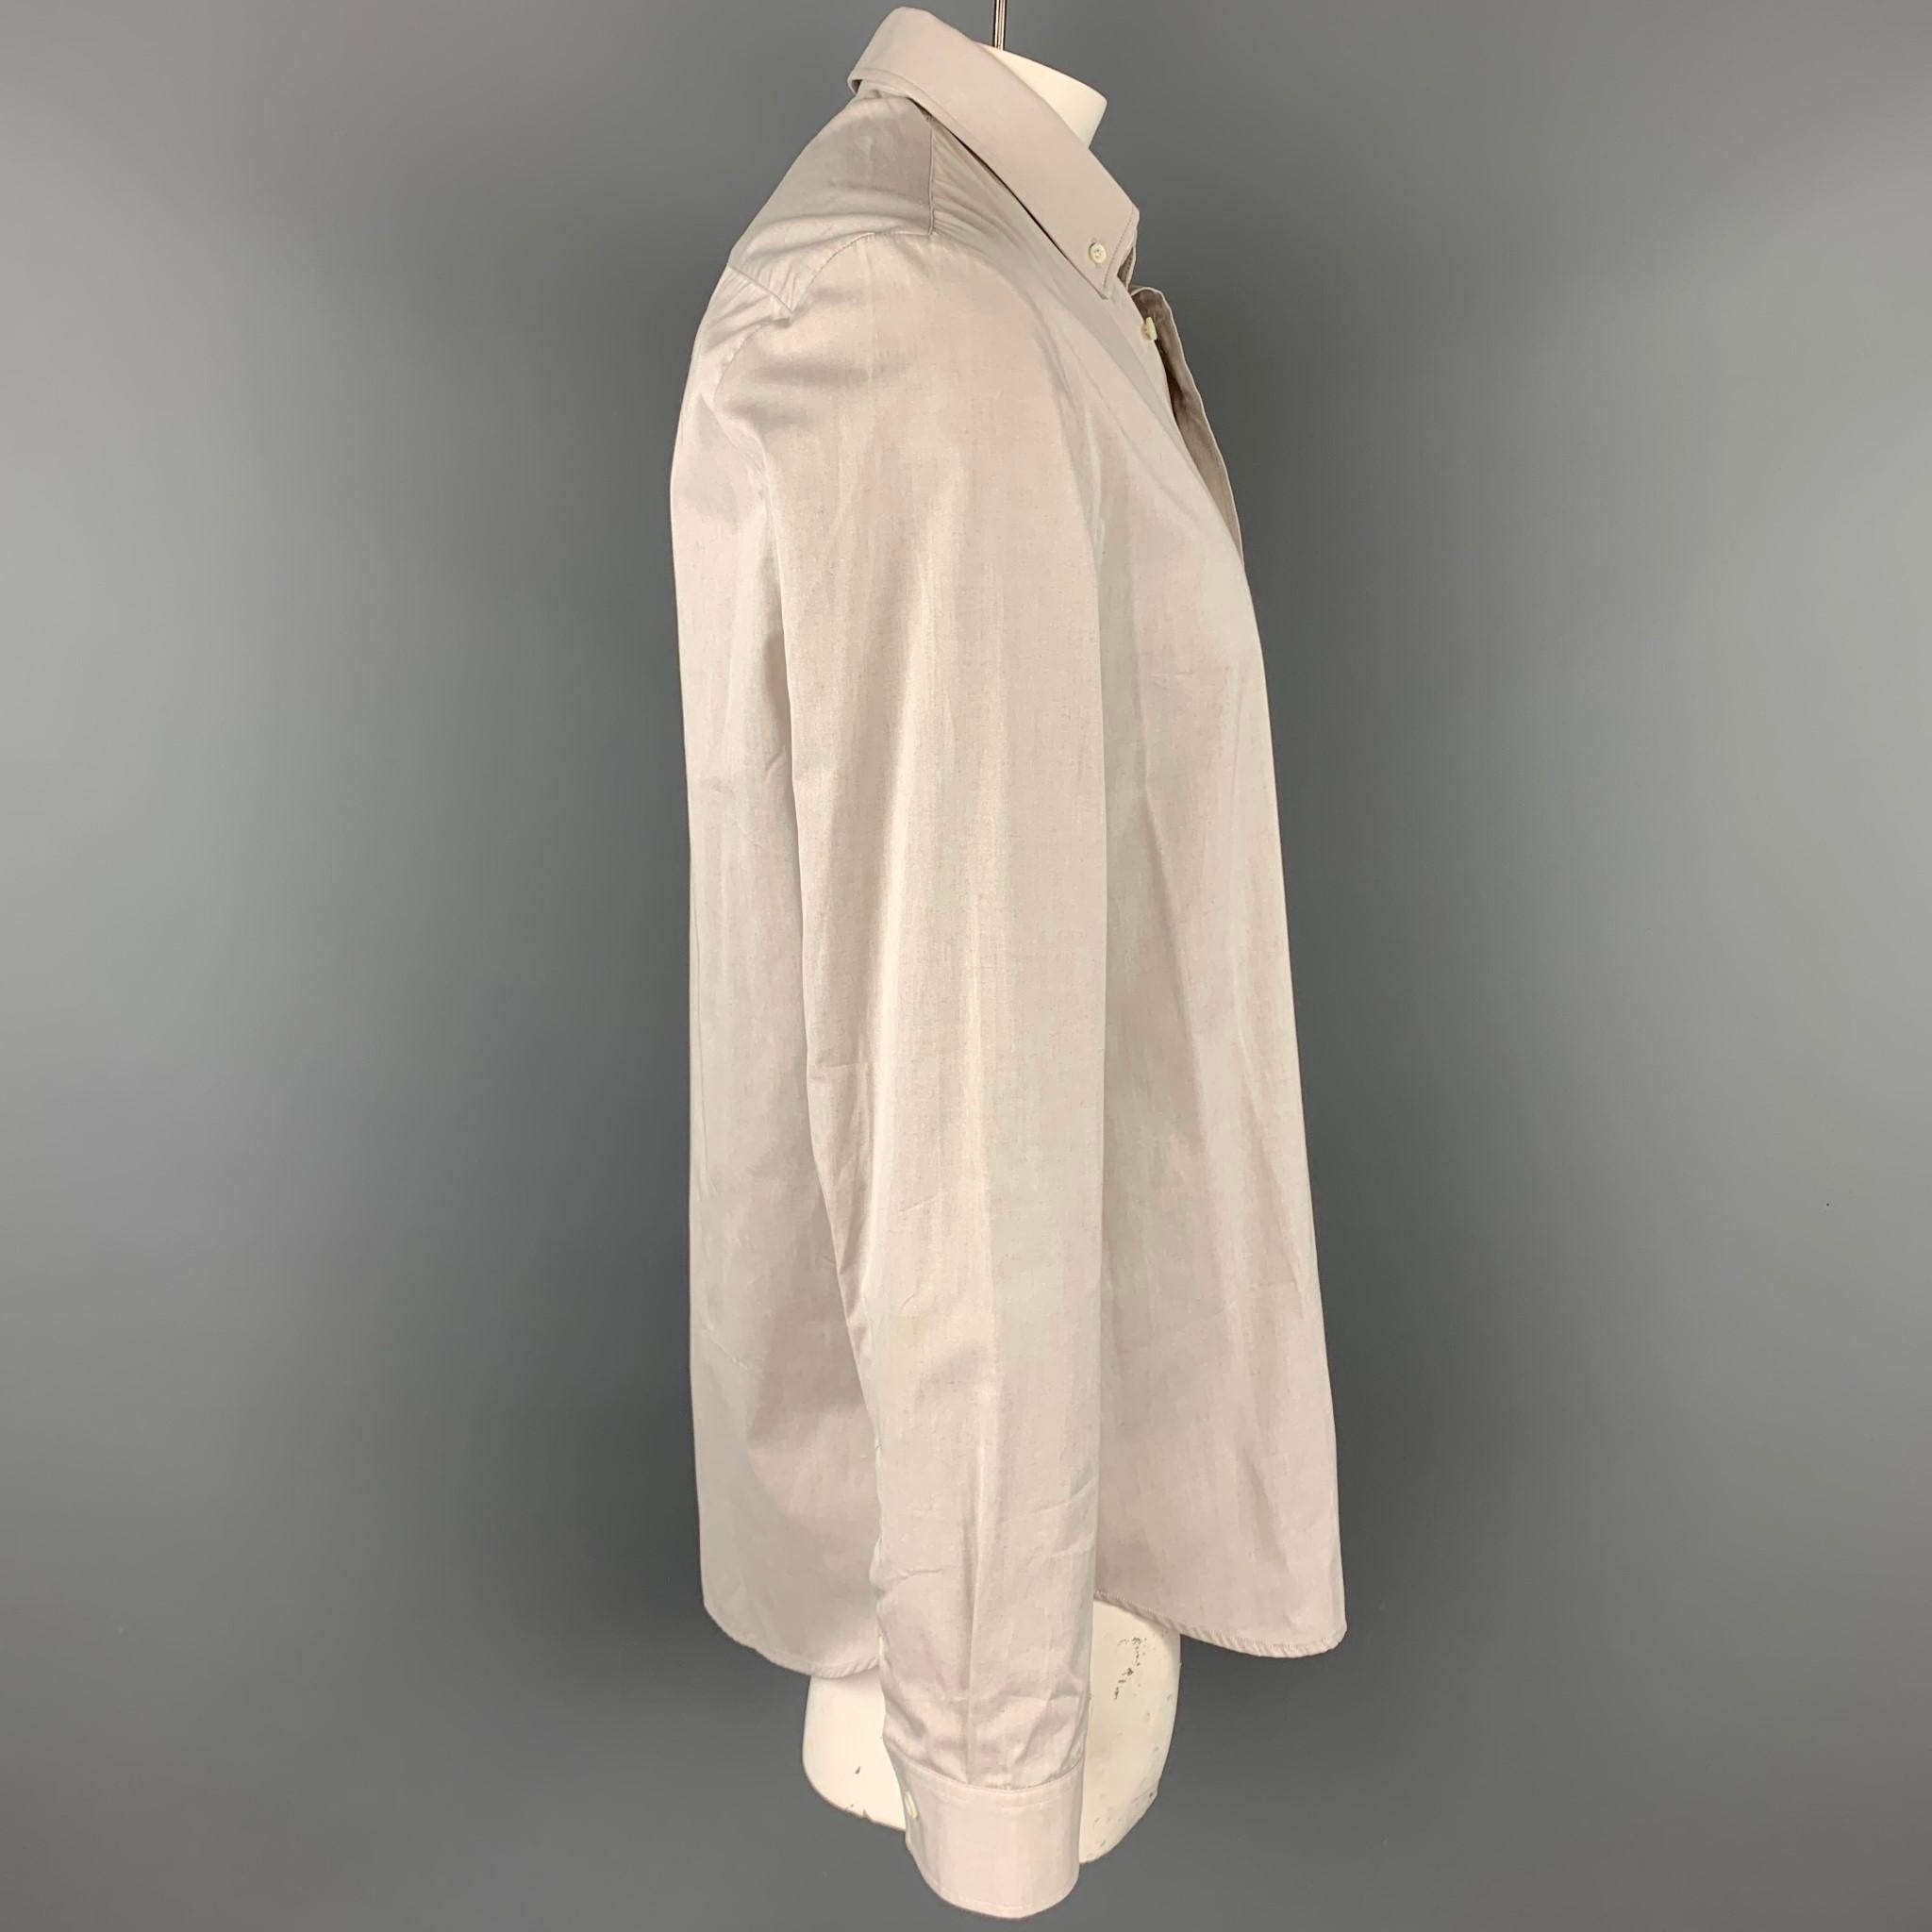 MAISON MARGIELA long sleeve shirt comes in a light grey cotton featuring a classic style and a button down closure. Made in Romania.

Very Good Pre-Owned Condition.
Marked: EU 43

Measurements:

Shoulder: 19.5 in.
Chest: 48 in.
Sleeve: 27.5